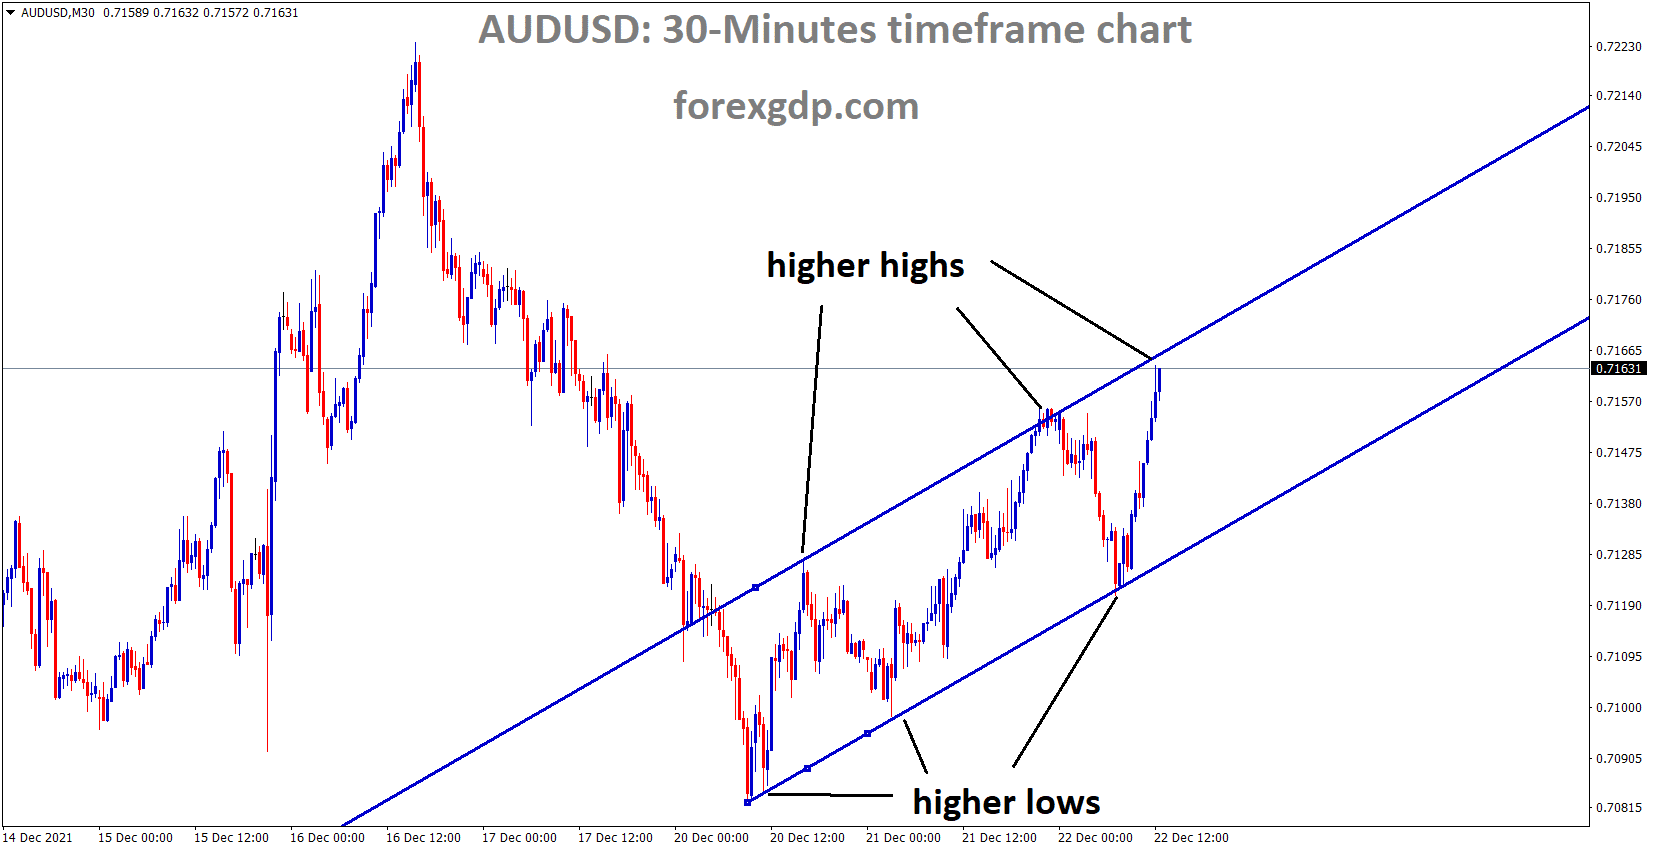 AUDUSD is moving in an Ascending channel and the market has reached the higher high area of the Channel